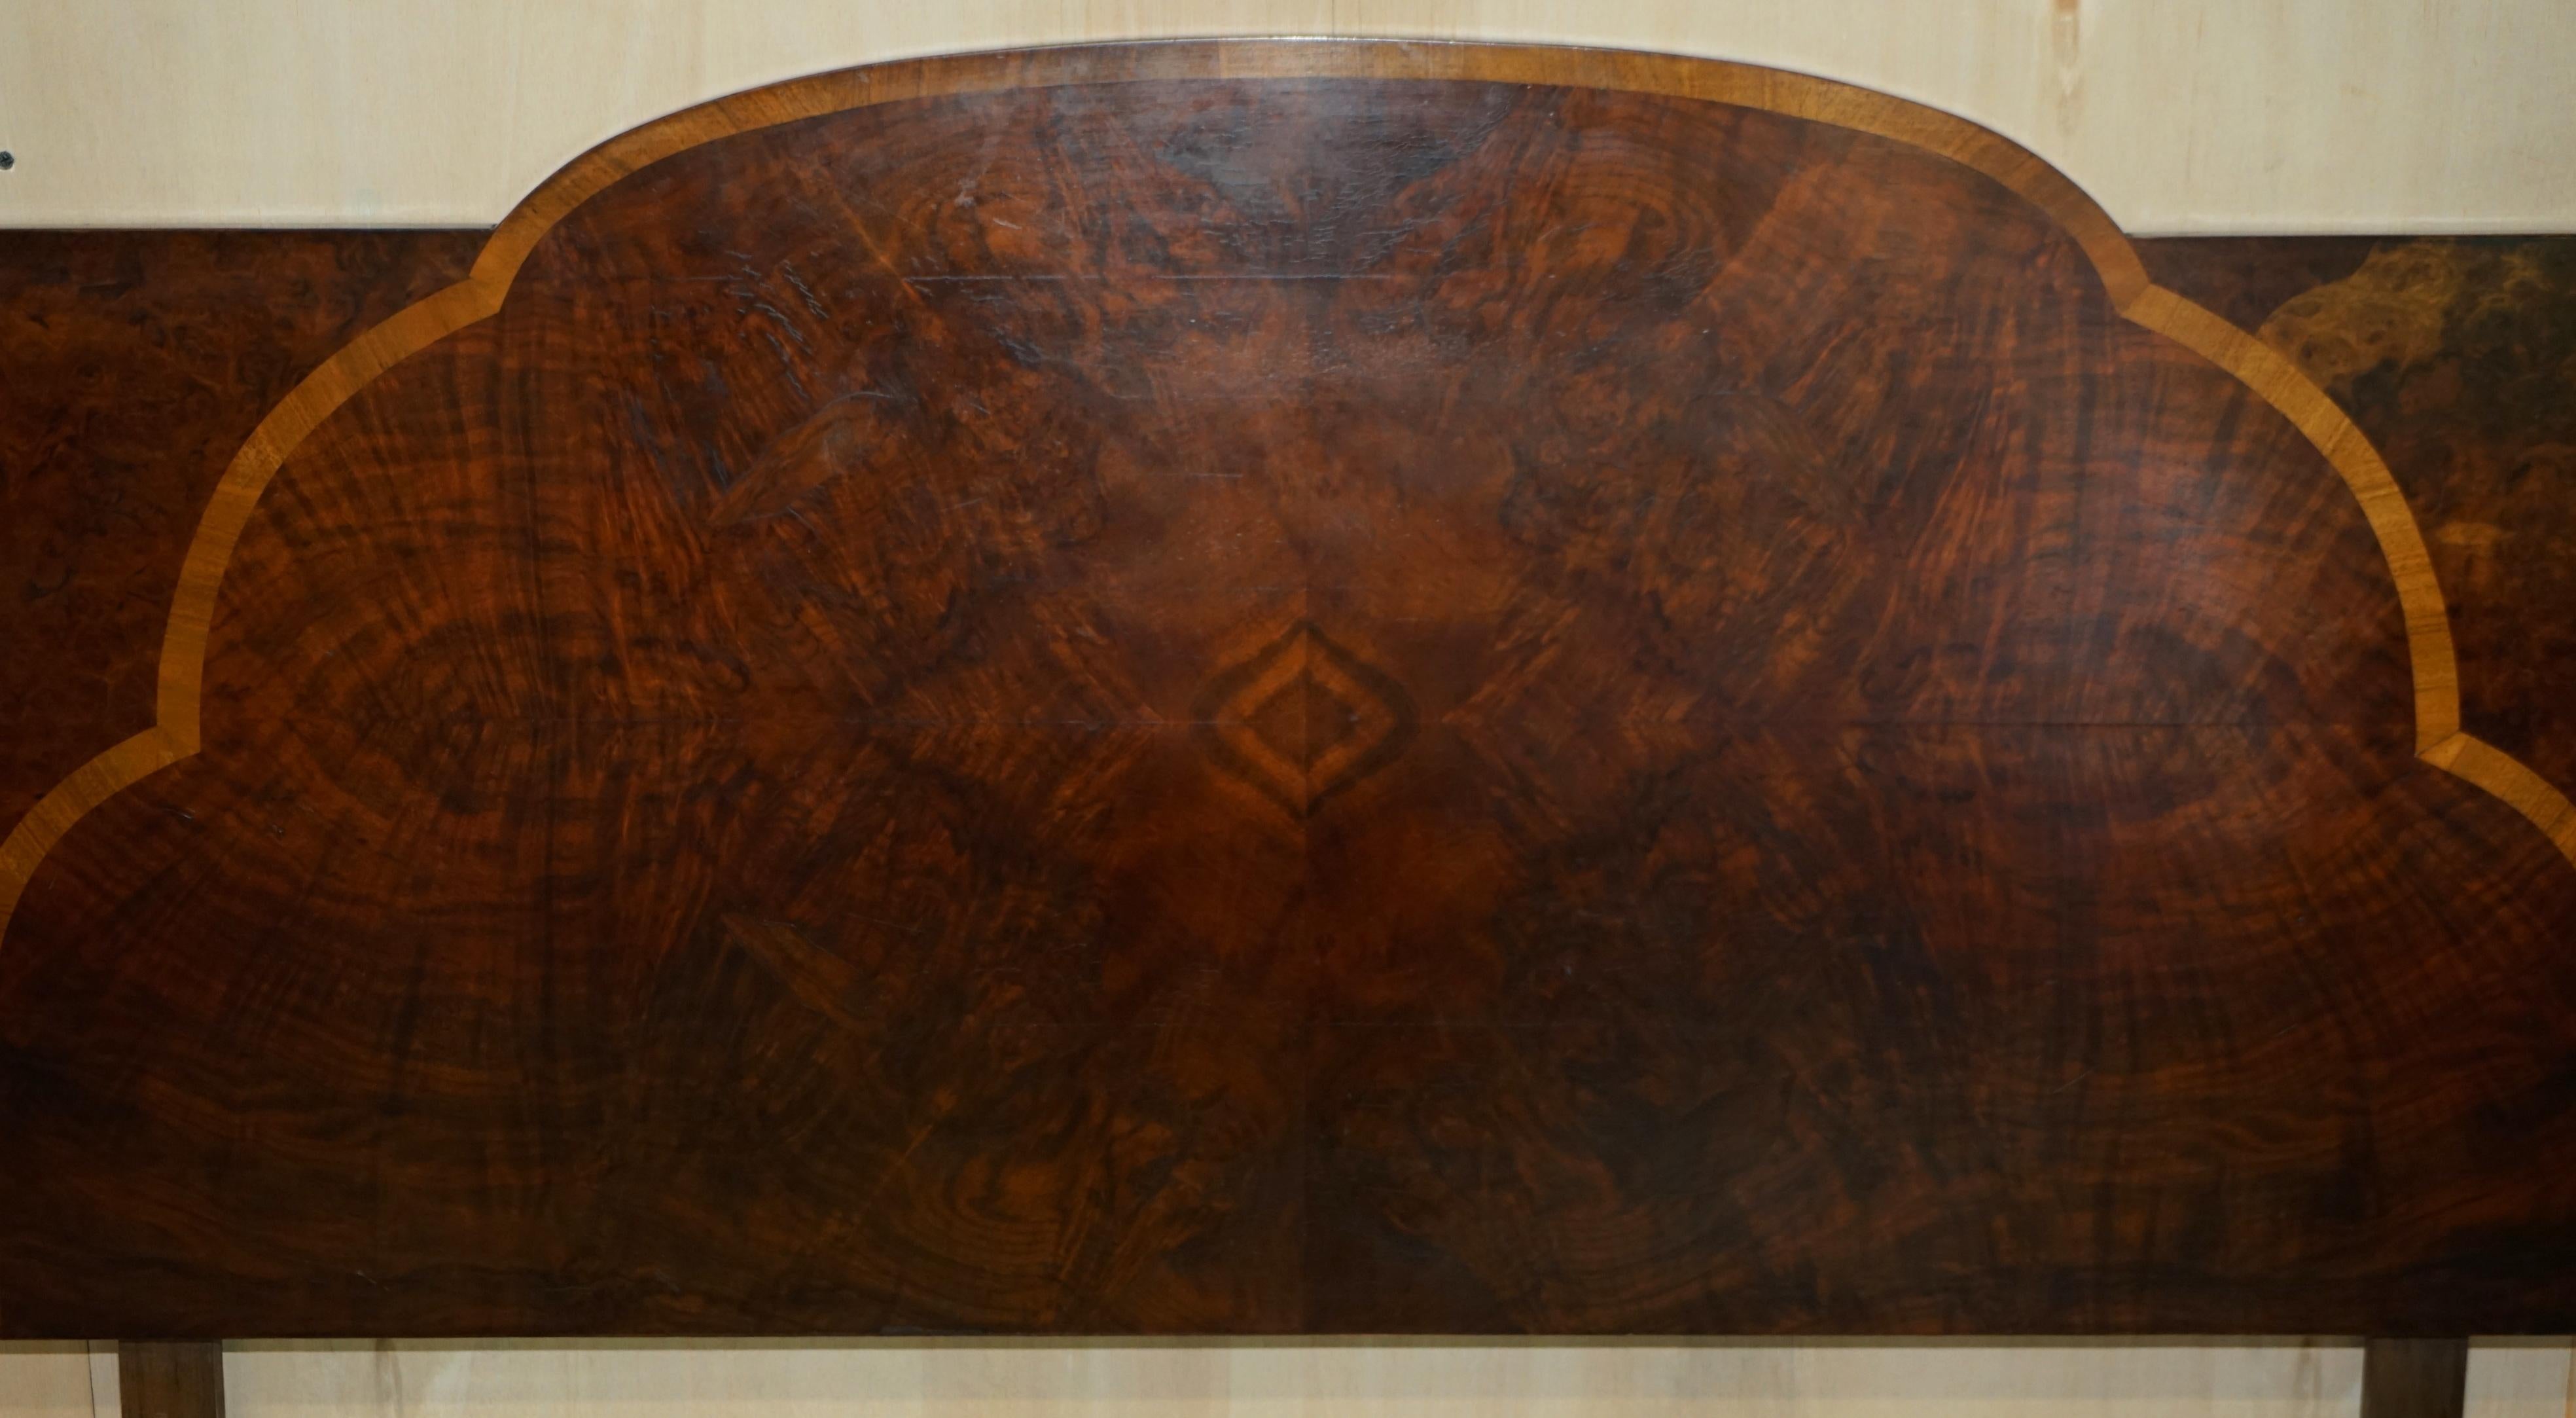 English Antique circa 1920 Burr Walnut Double Headboard Which Is Part of a Large Suite